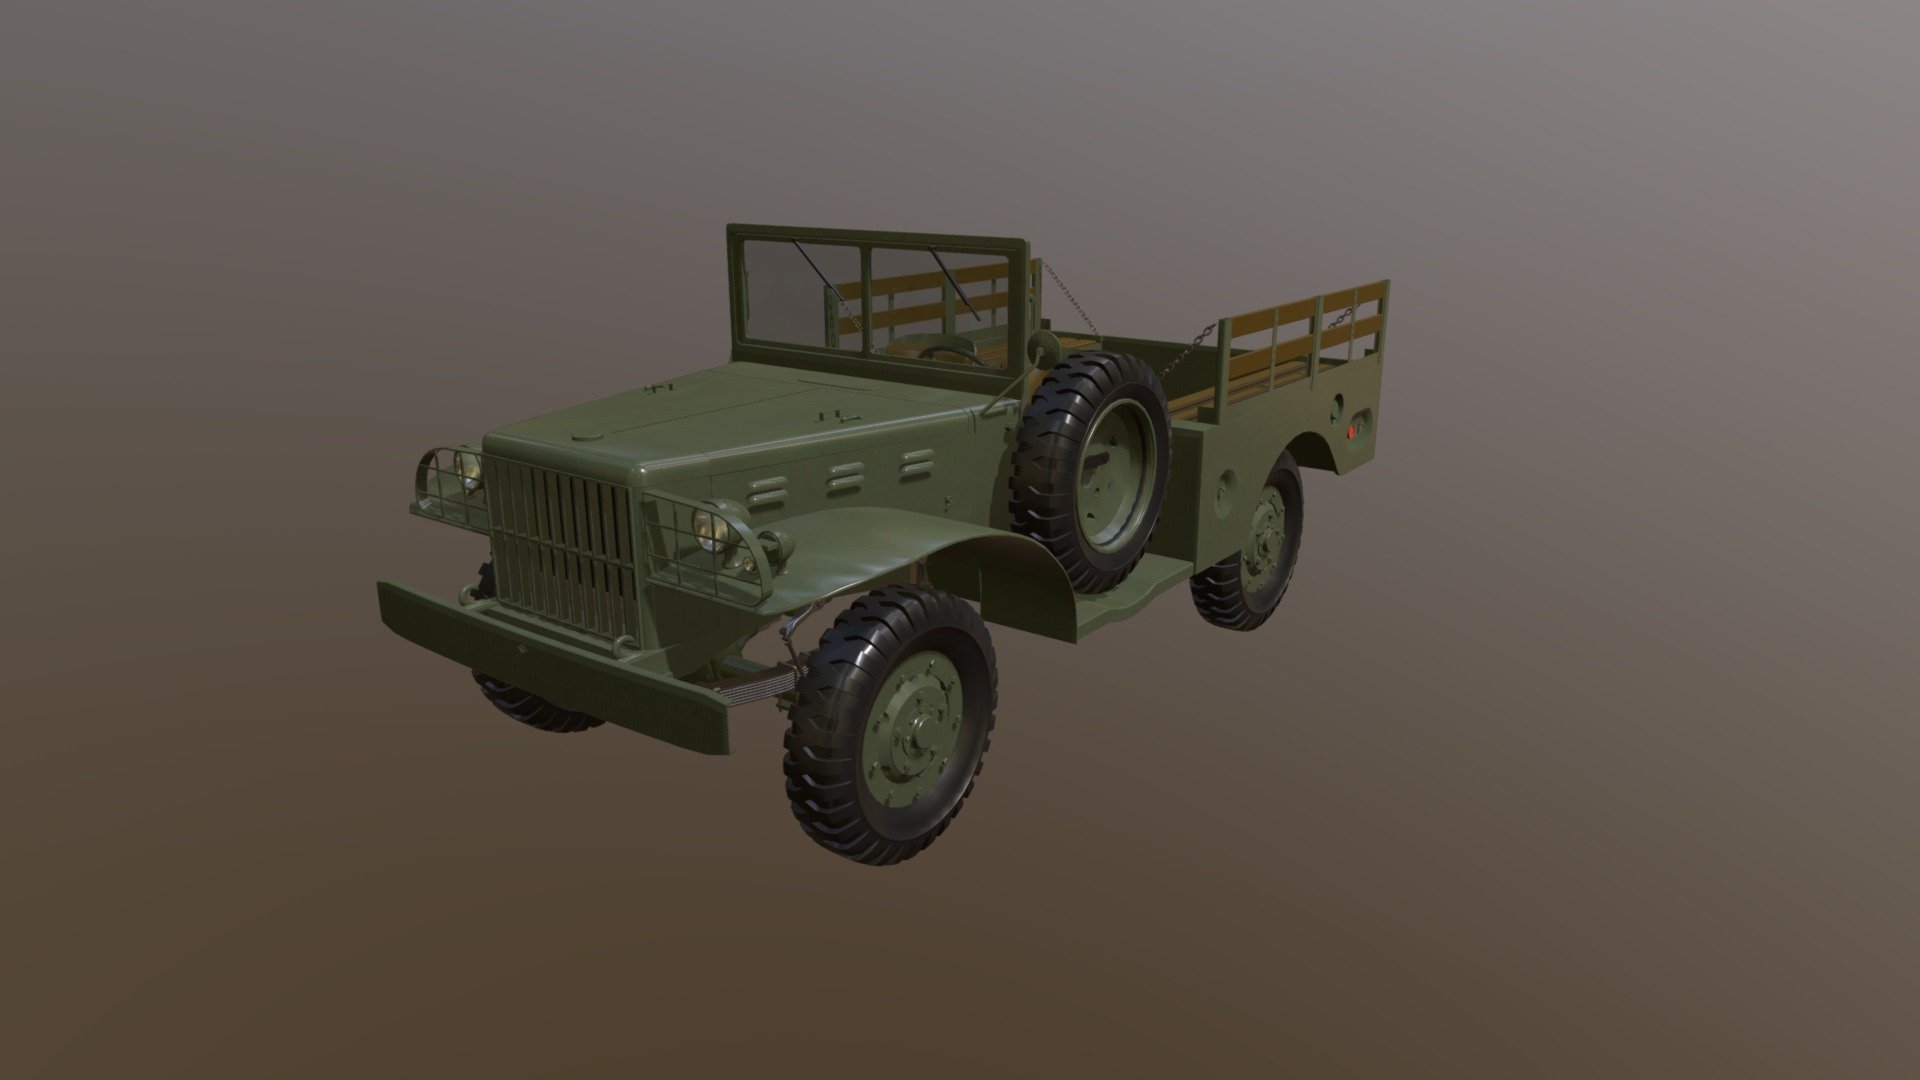 truck millitary from ww2 designed in c4d textured in substaince painter
with separate wheels and steering wheel - Dodge Truck Millitary ww2 - Download Free 3D model by mohaiba 3d model